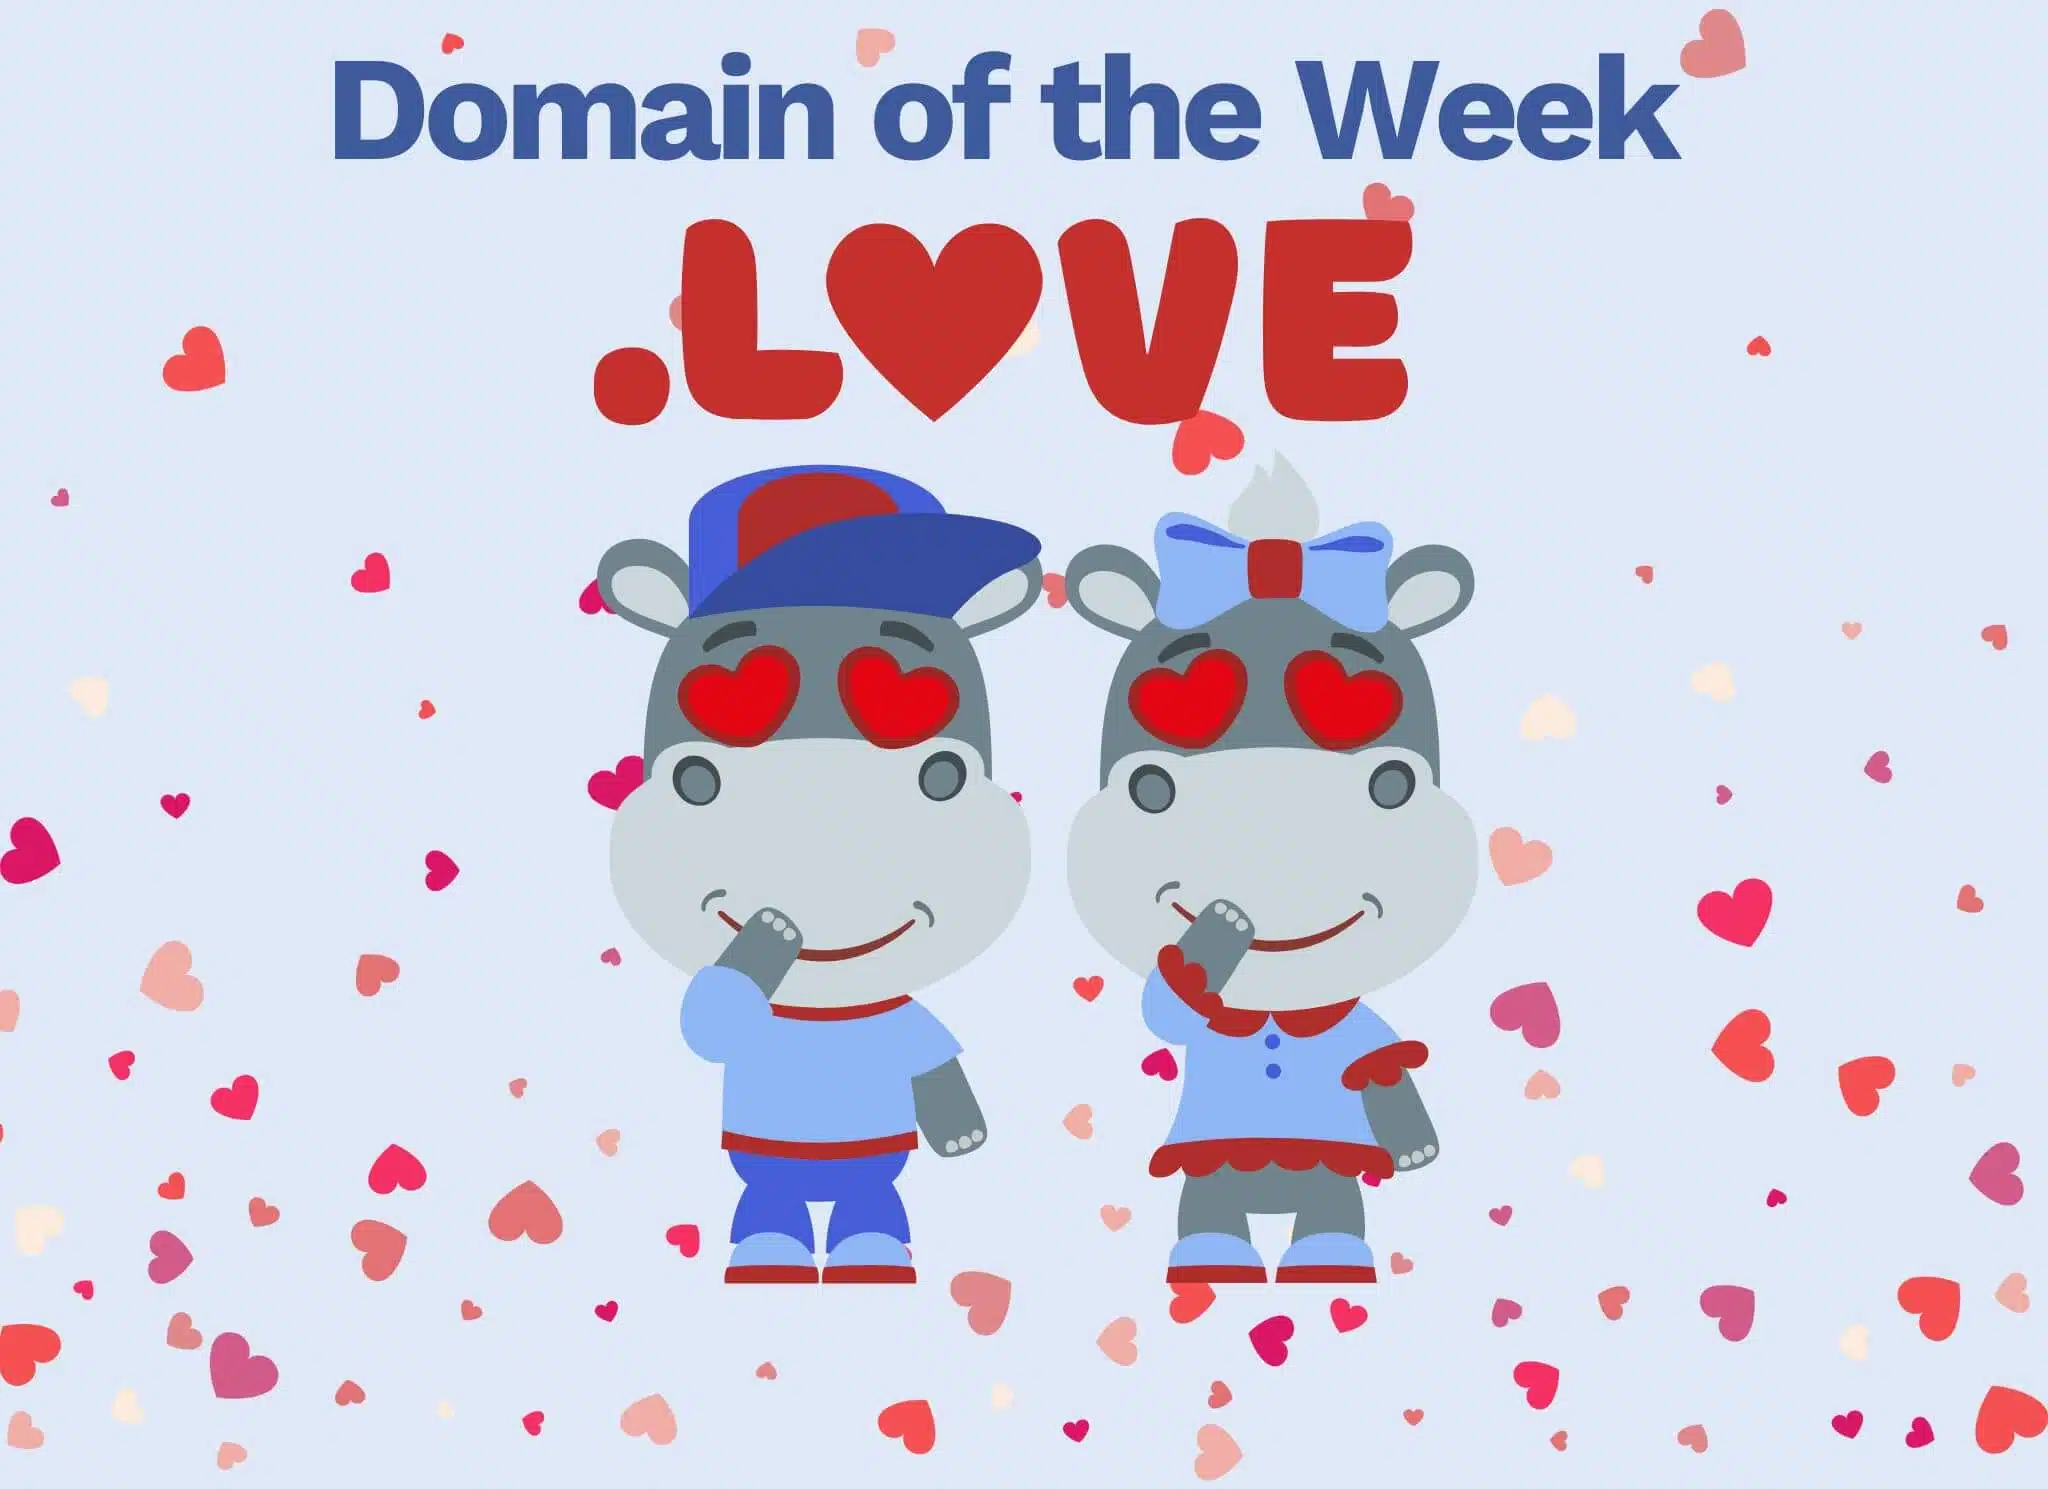 Domain of the Week. A .love domain from Hipposerve perfect for Valentine's any other loving time